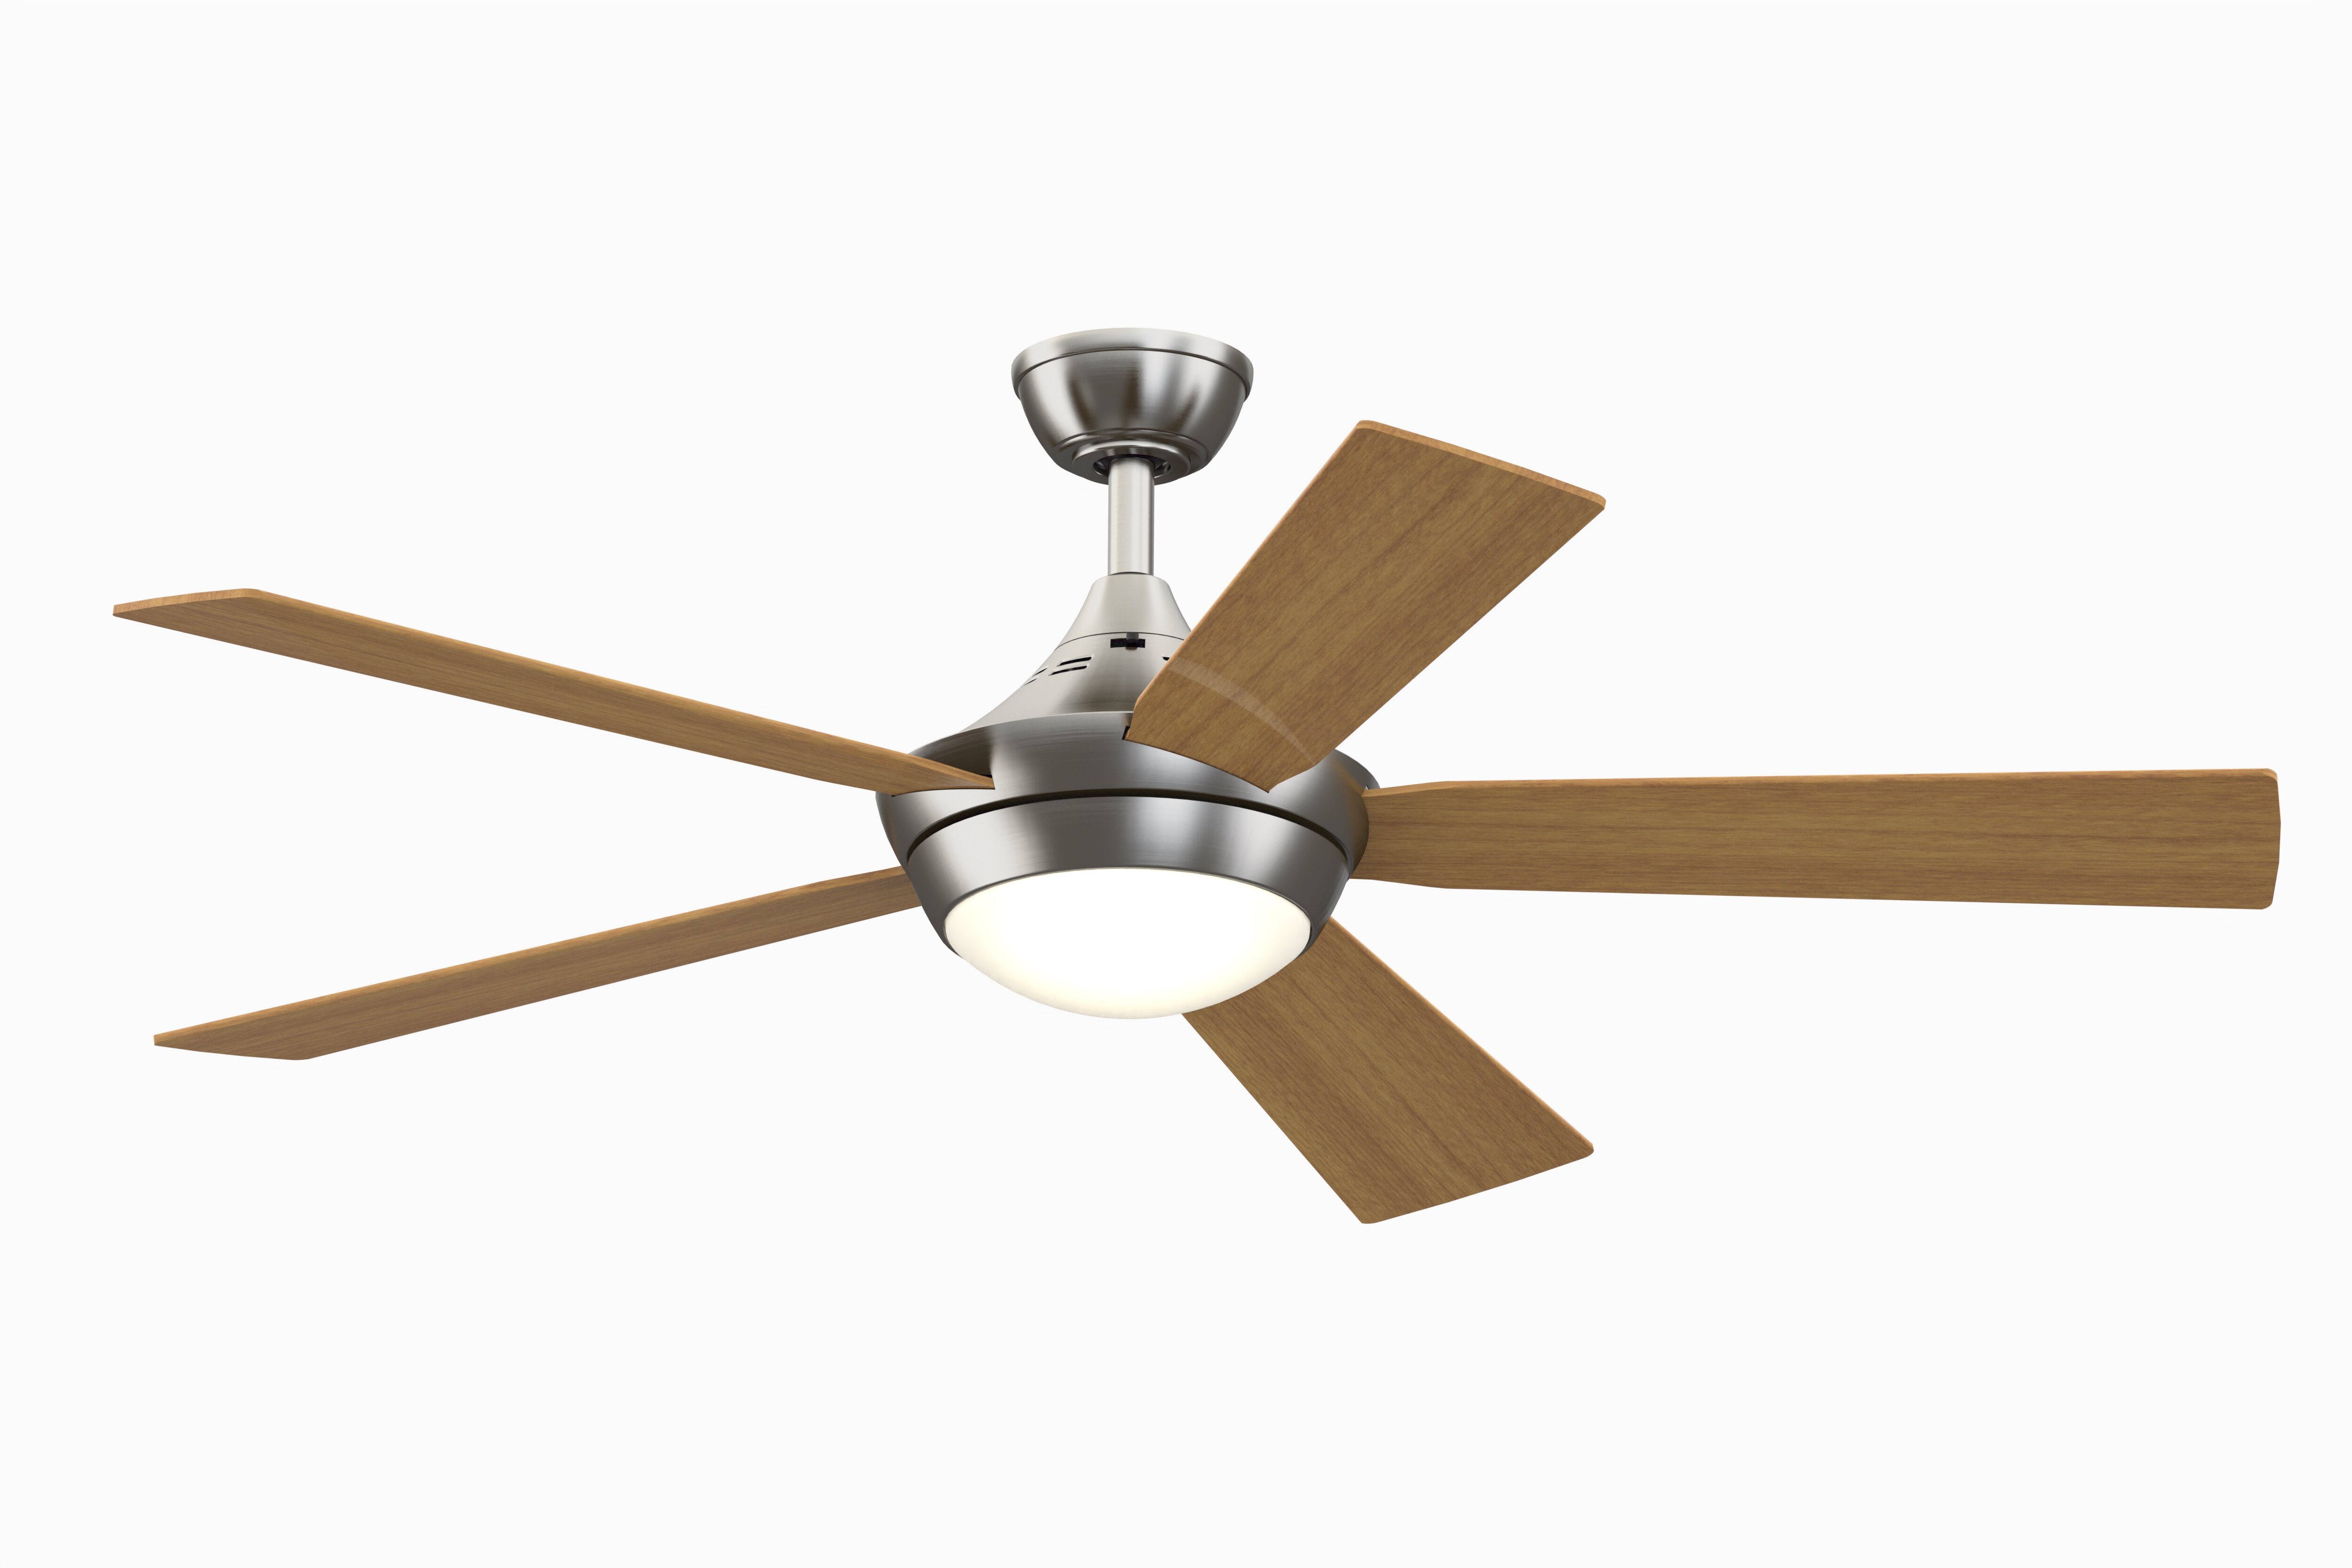 Old Bronze w/ LED Light & Remote Control Ceiling Fan 52" 56'' Brushed Nickel 